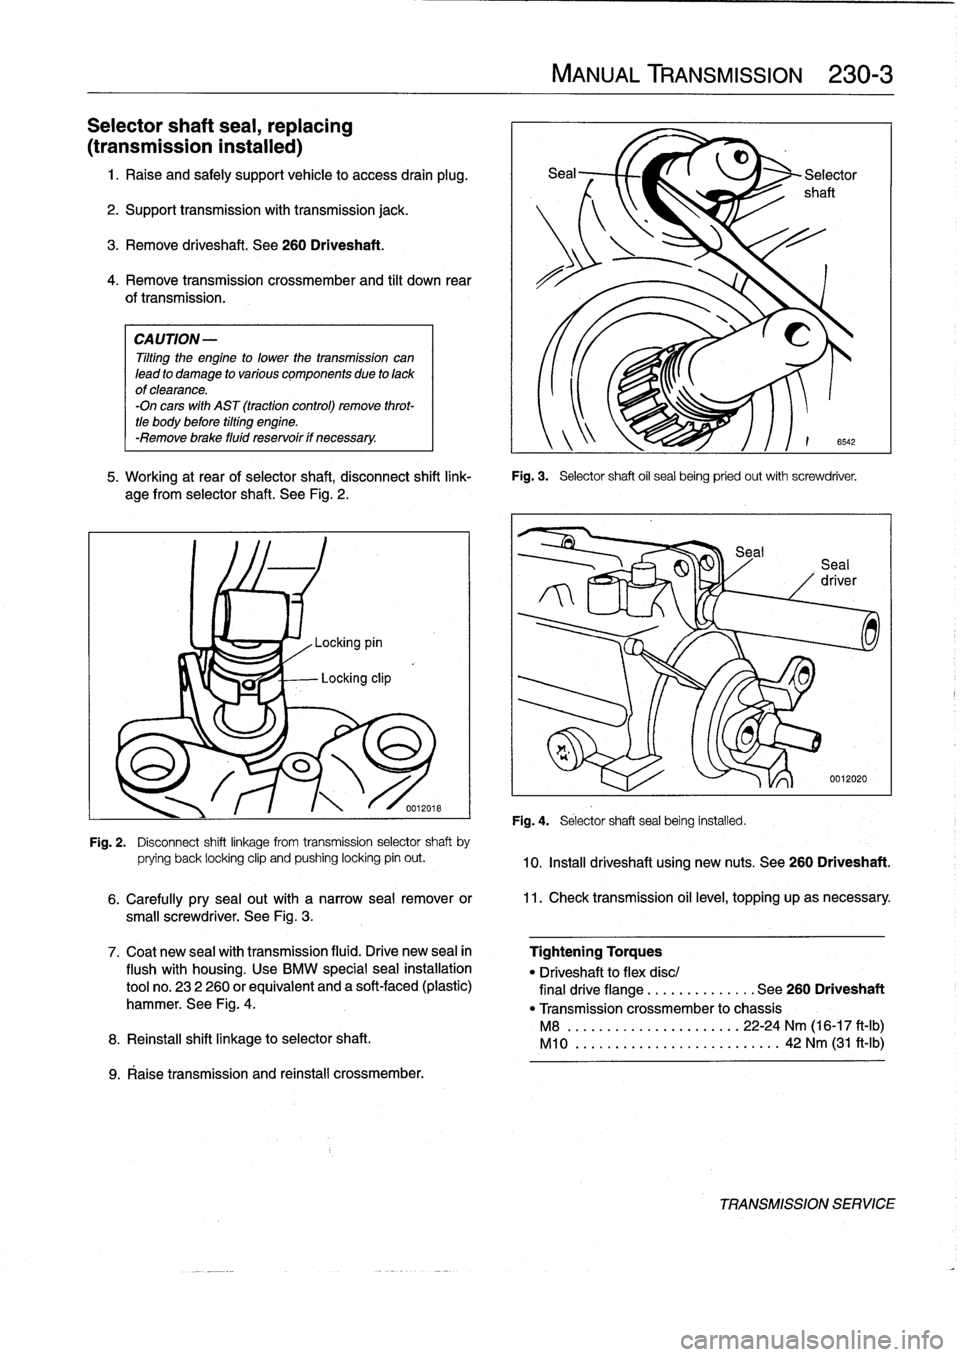 BMW 328i 1997 E36 User Guide 
Selector
shaft
seal,
replacing

(transmission
instalied)

1
.
Raise
and
safely
support
vehicle
to
access
drain
plug
.

2
.
Support
transmission
with
transmission
jack
.

3
.
Remove
driveshaft
.
See
2